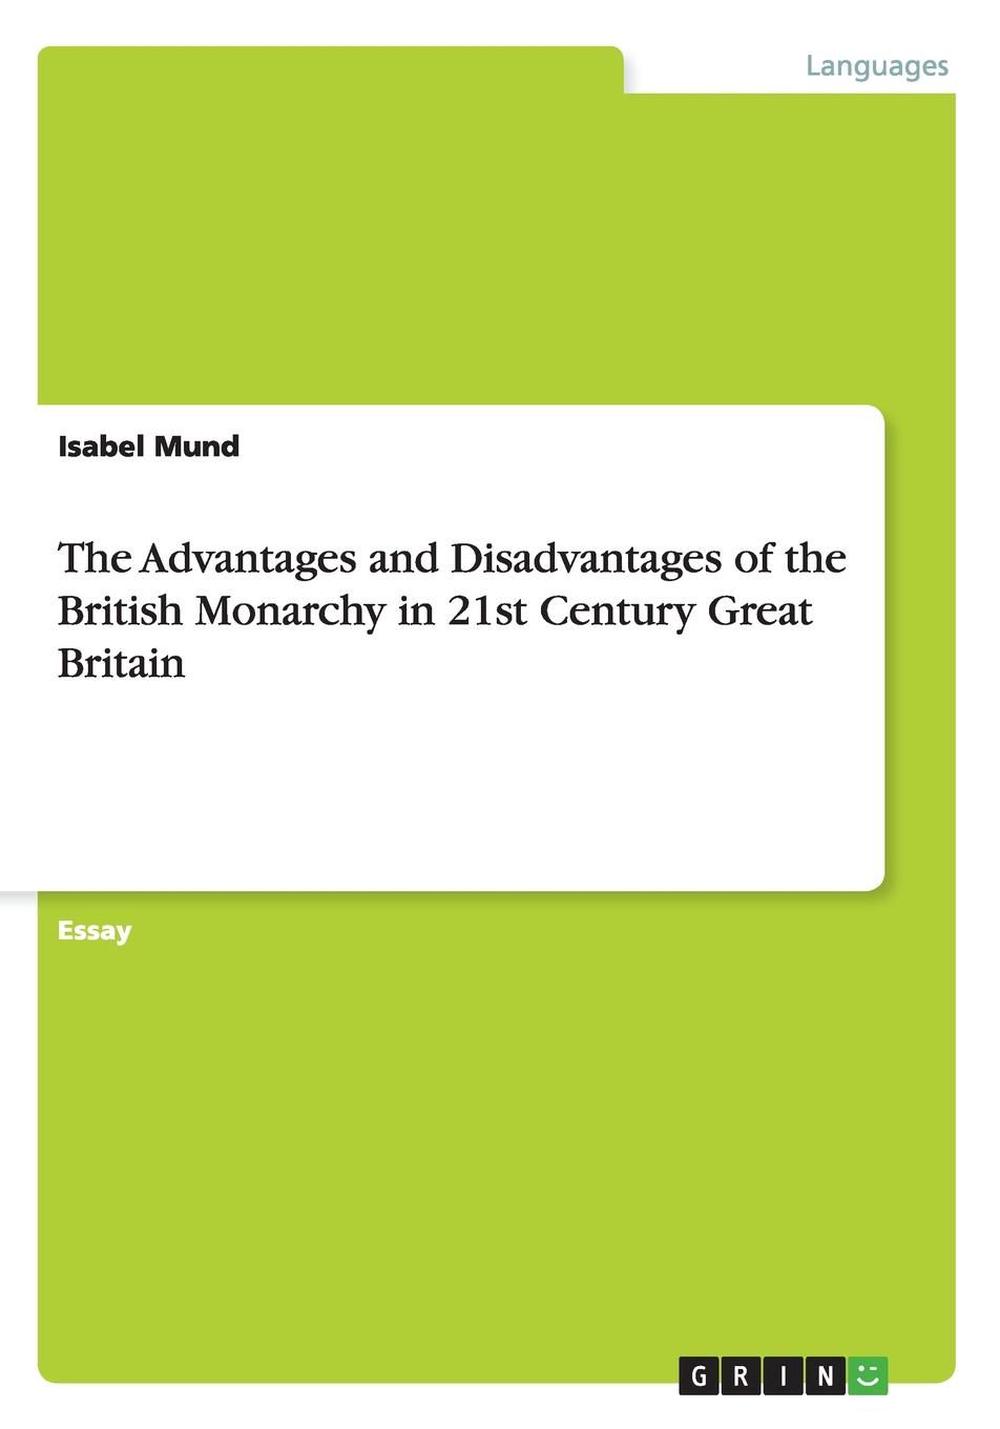 advantages and disadvantages of monarchy